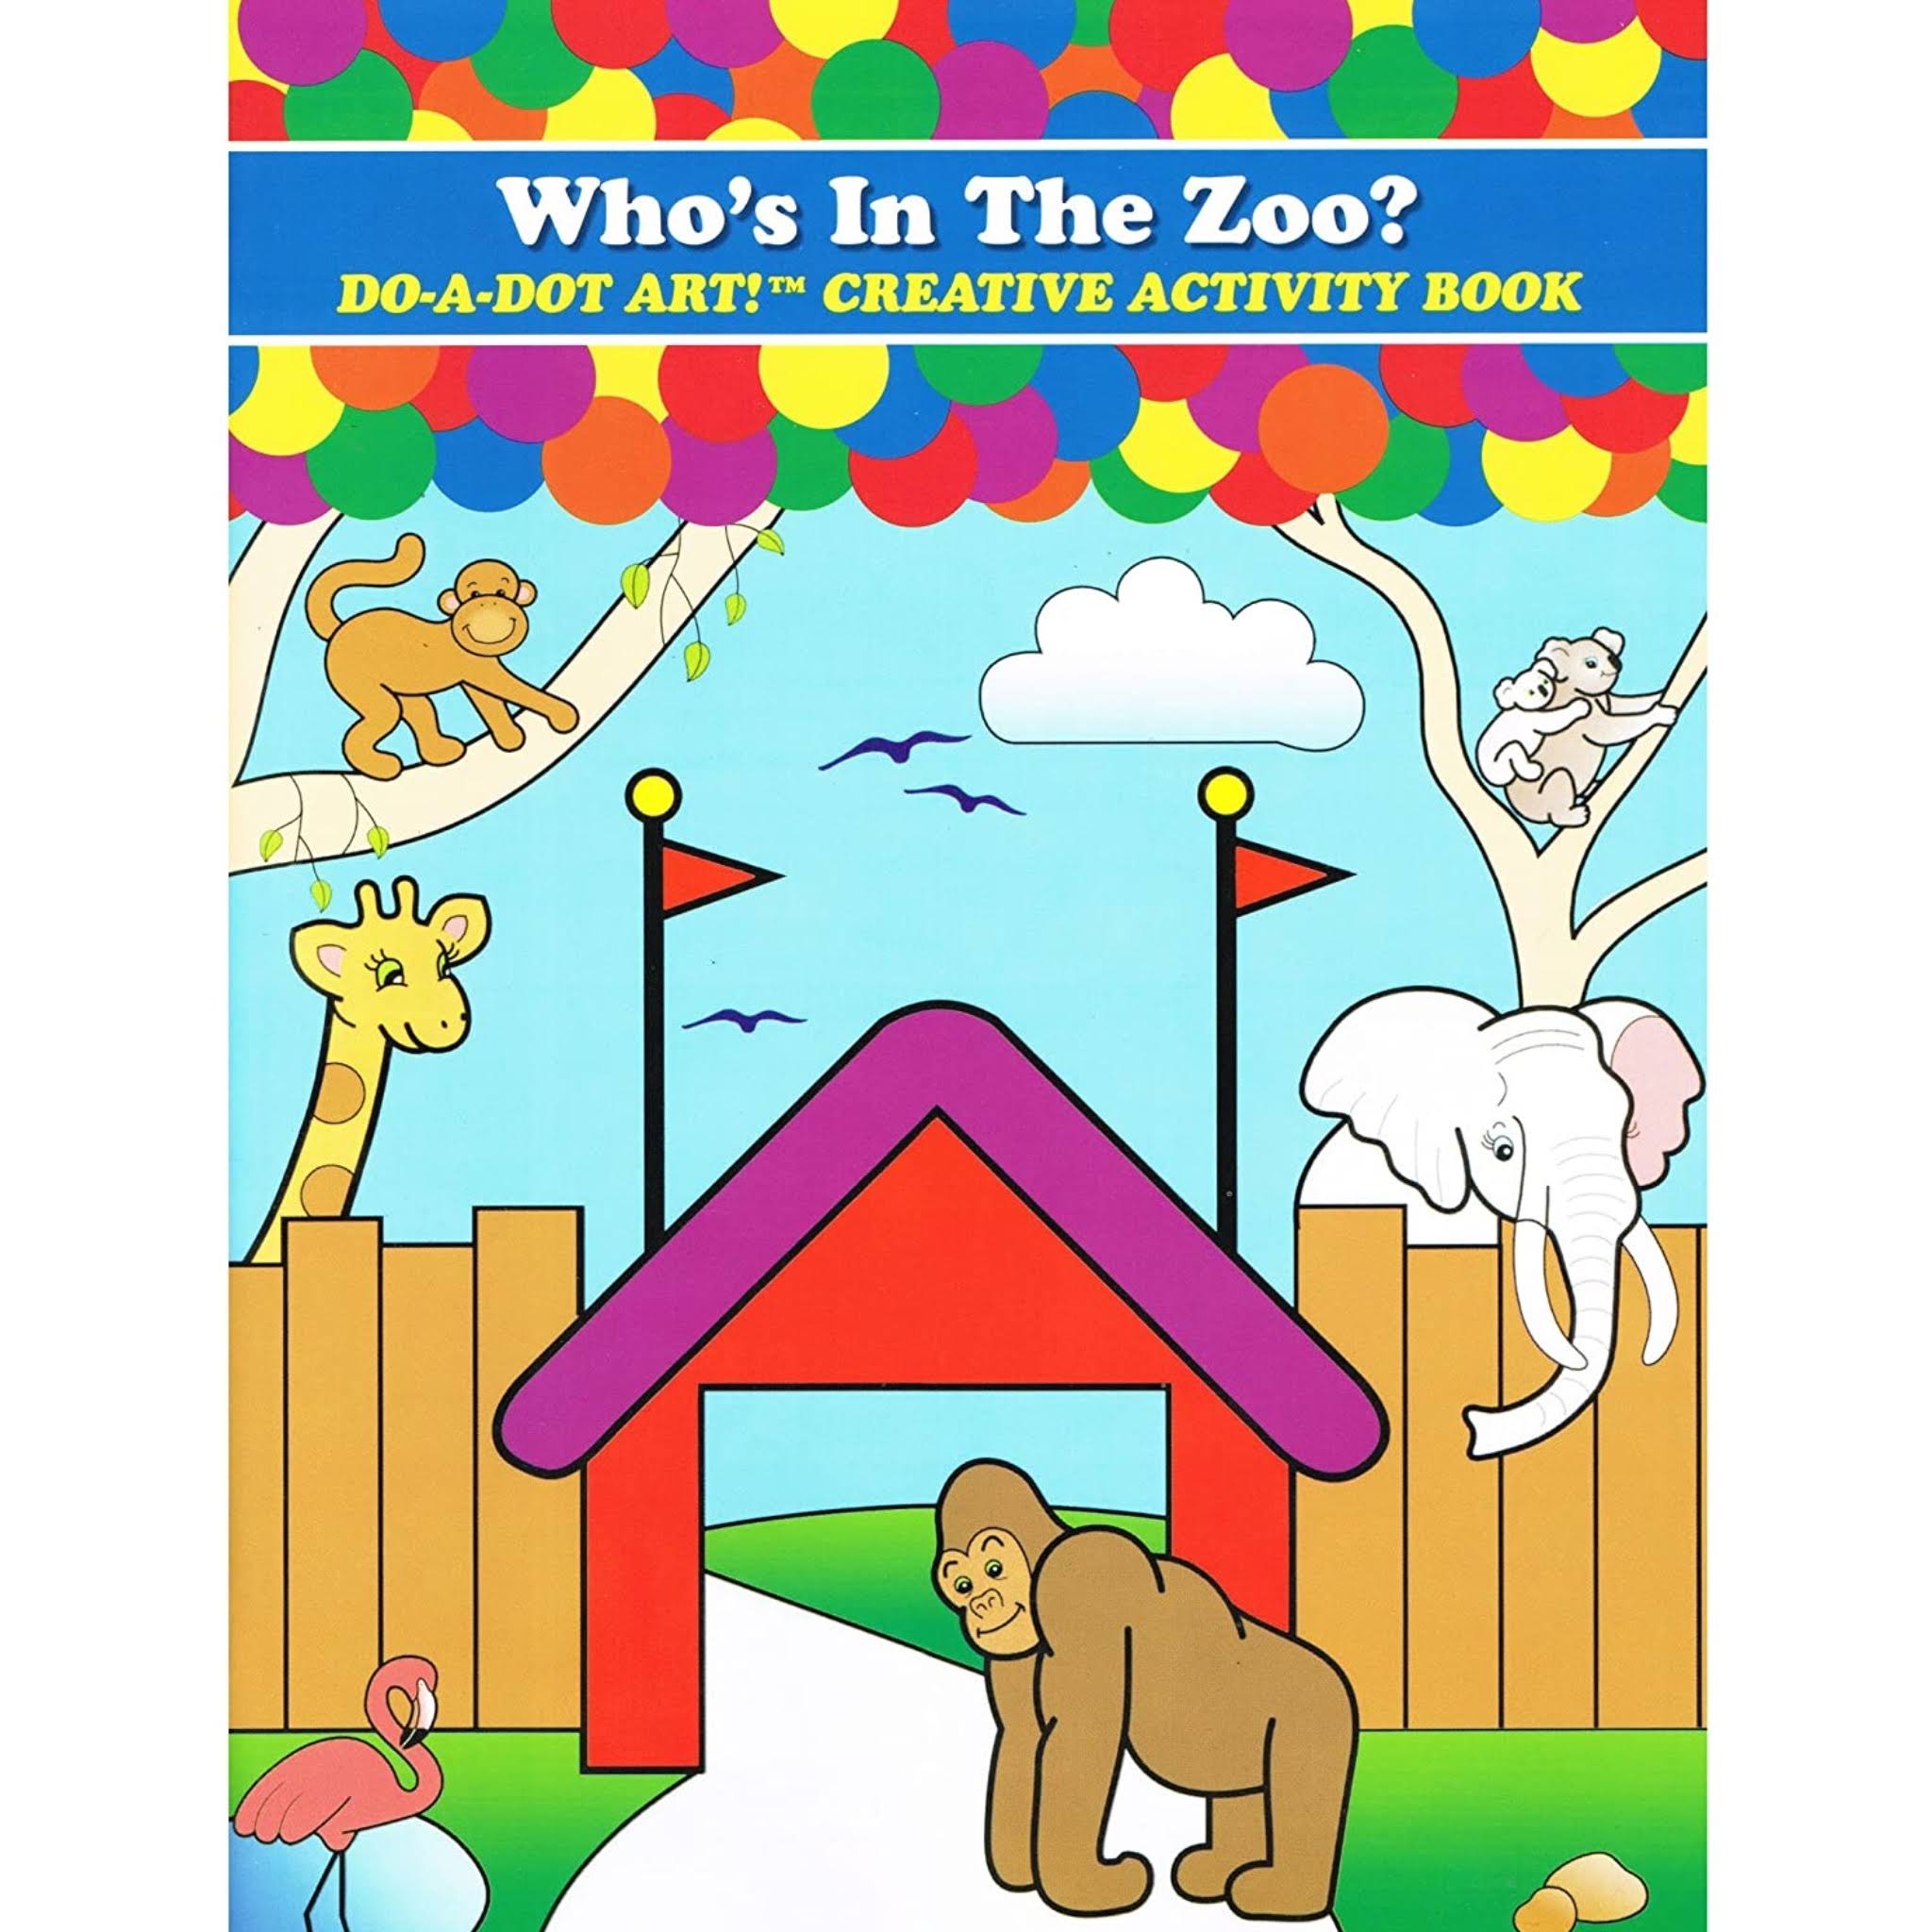 Do-A-Dot Activity Book - Who's in the Zoo?